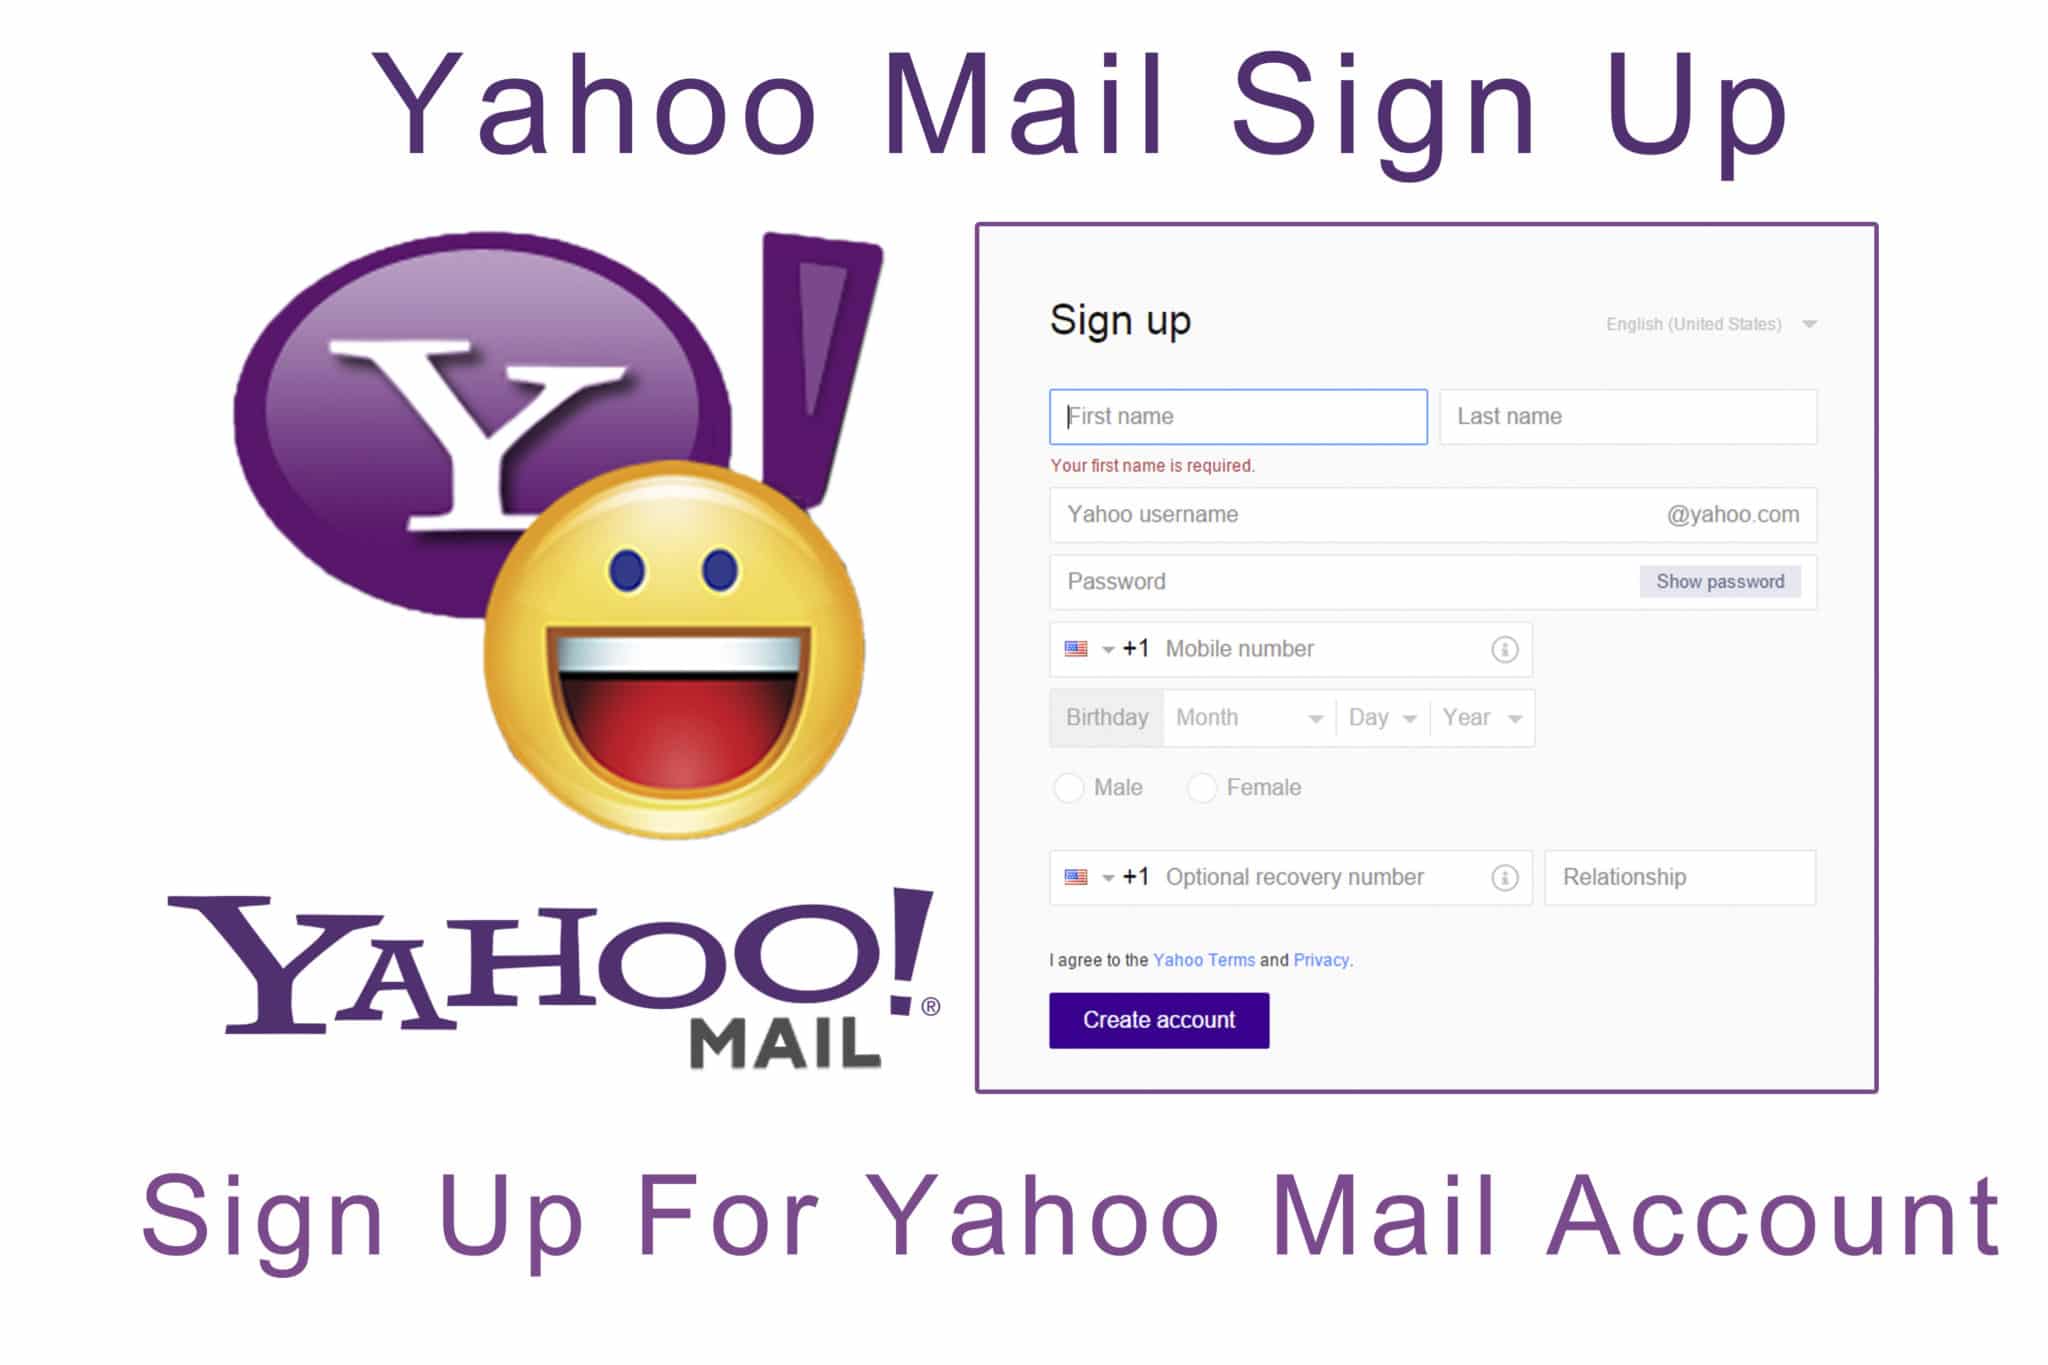 Yahoo Mail Sign Up – How To Perform a Yahoo Sign Up